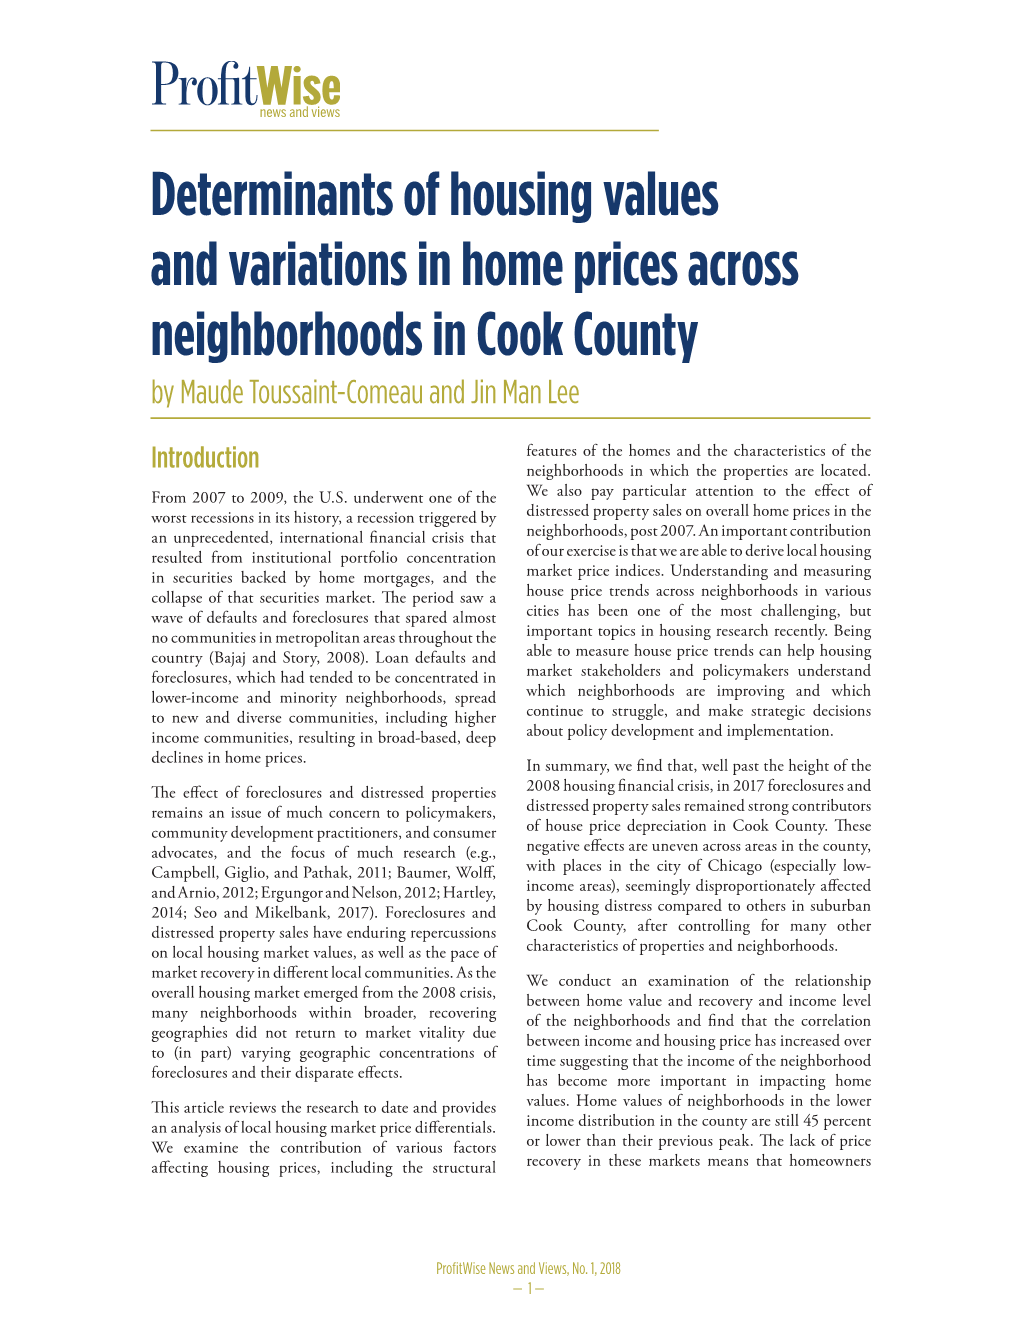 Determinants of Housing Values and Variations in Home Prices Across Neighborhoods in Cook County by Maude Toussaint-Comeau and Jin Man Lee